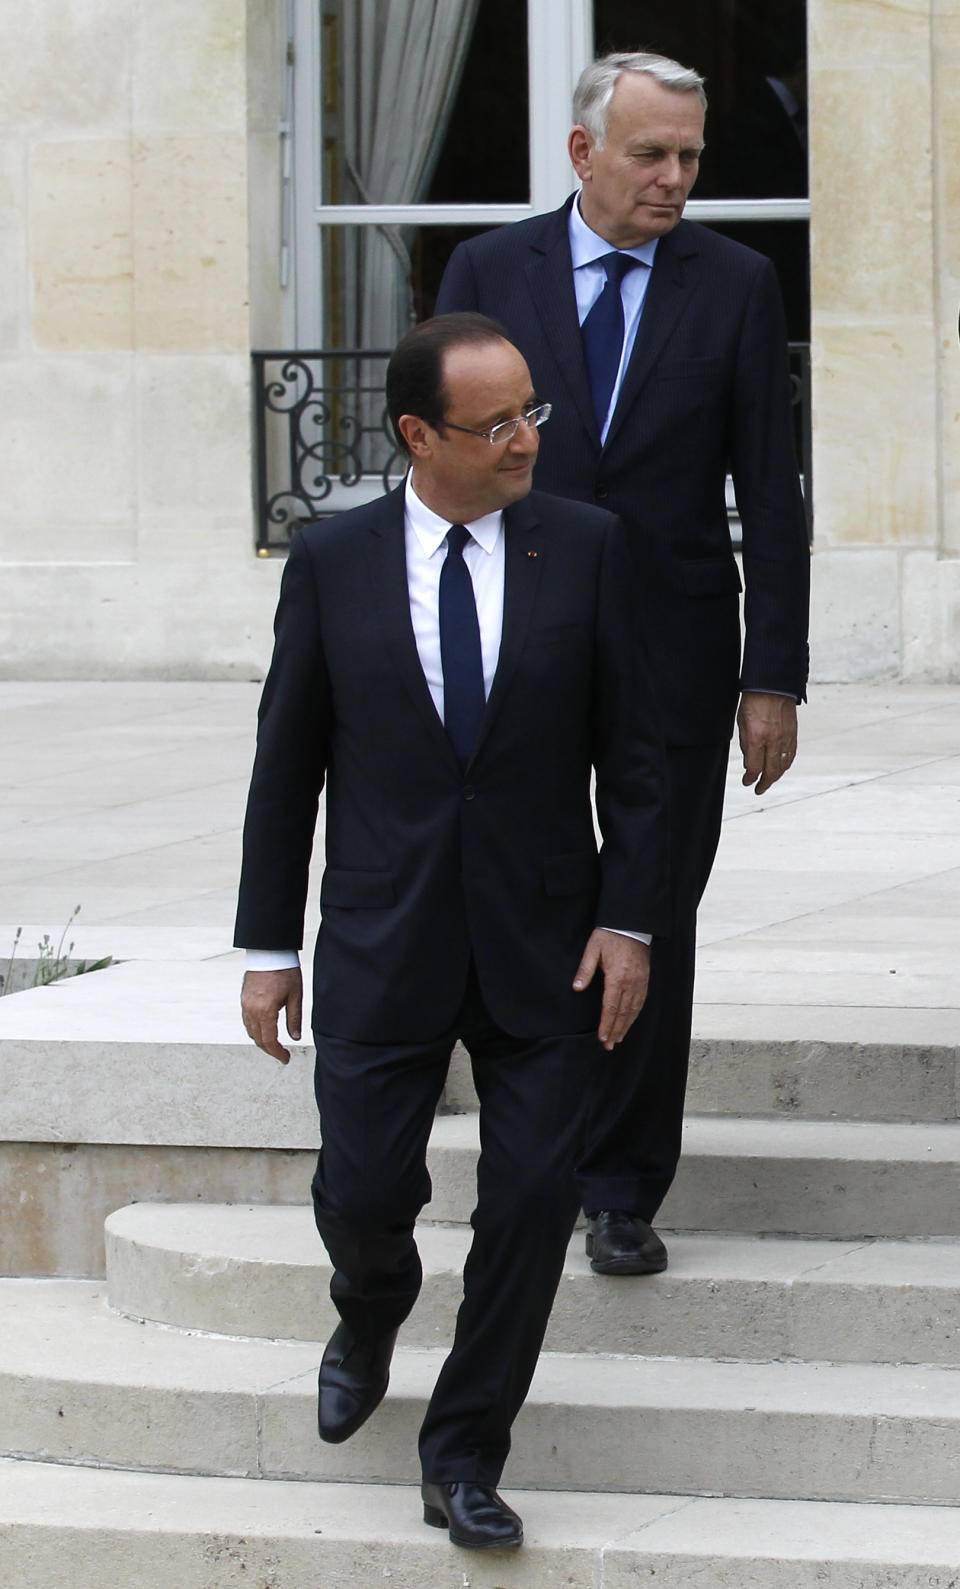 President Francois Hollande, followed by Prime Minister Jean-Luc Ayrault, arrives for the family picture after the weekly cabinet meeting, Thursday, May 17, 2012 at the Elysee Palace in Paris. (AP Photo/Michel Euler)